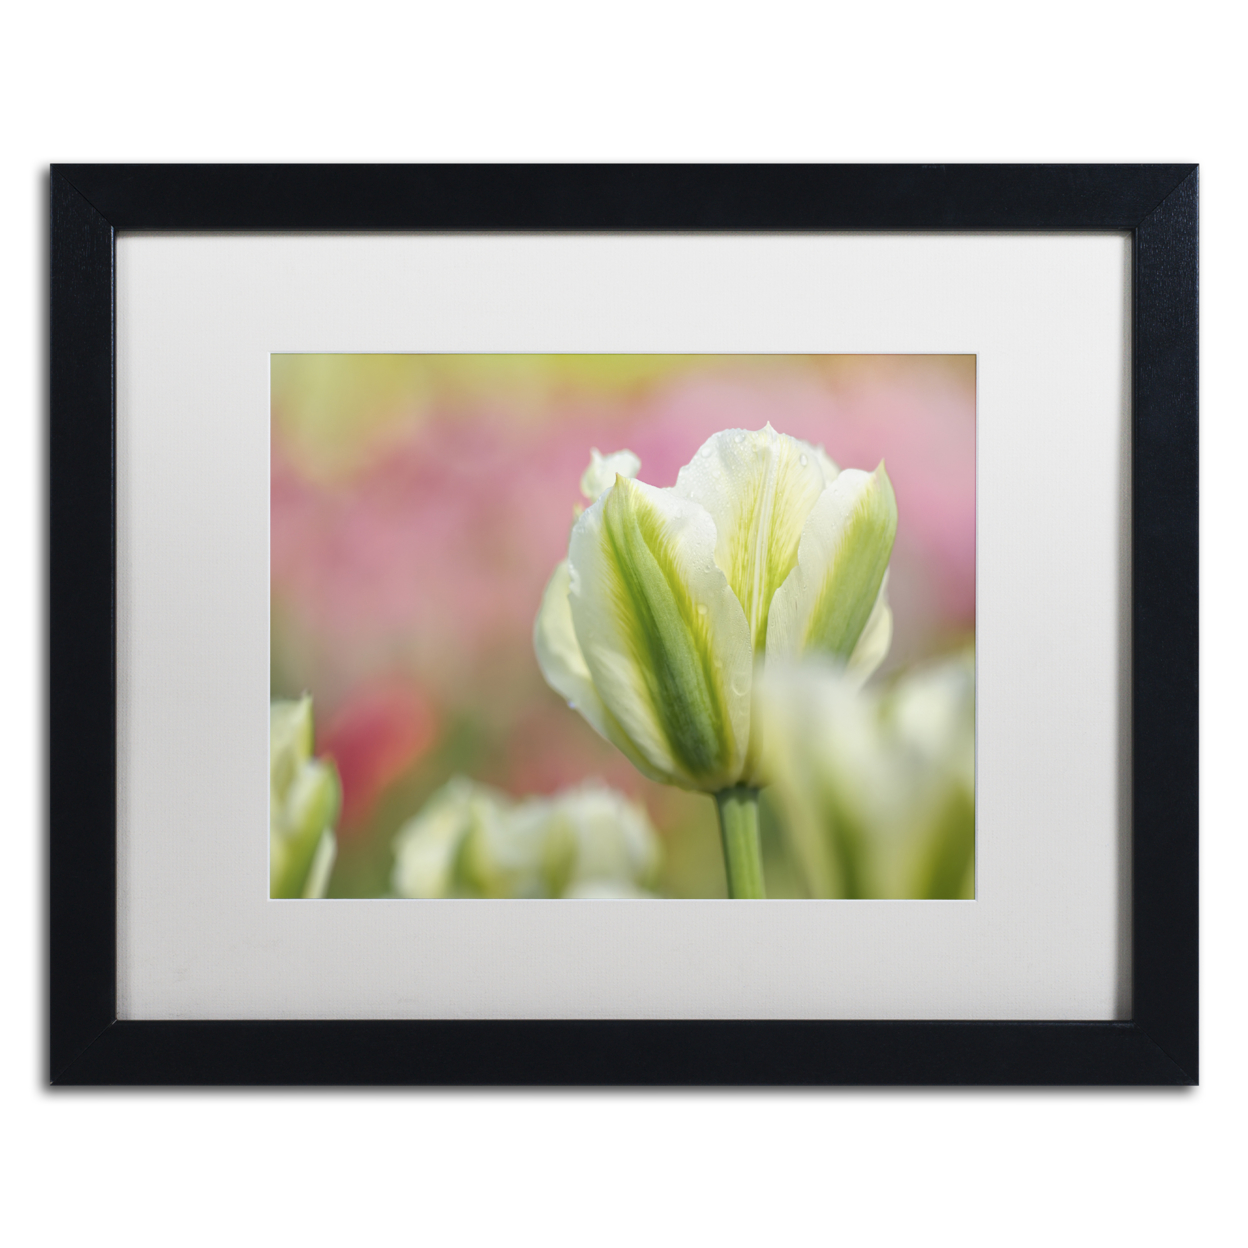 Cora Niele 'White And Green Tulip' Black Wooden Framed Art 18 X 22 Inches